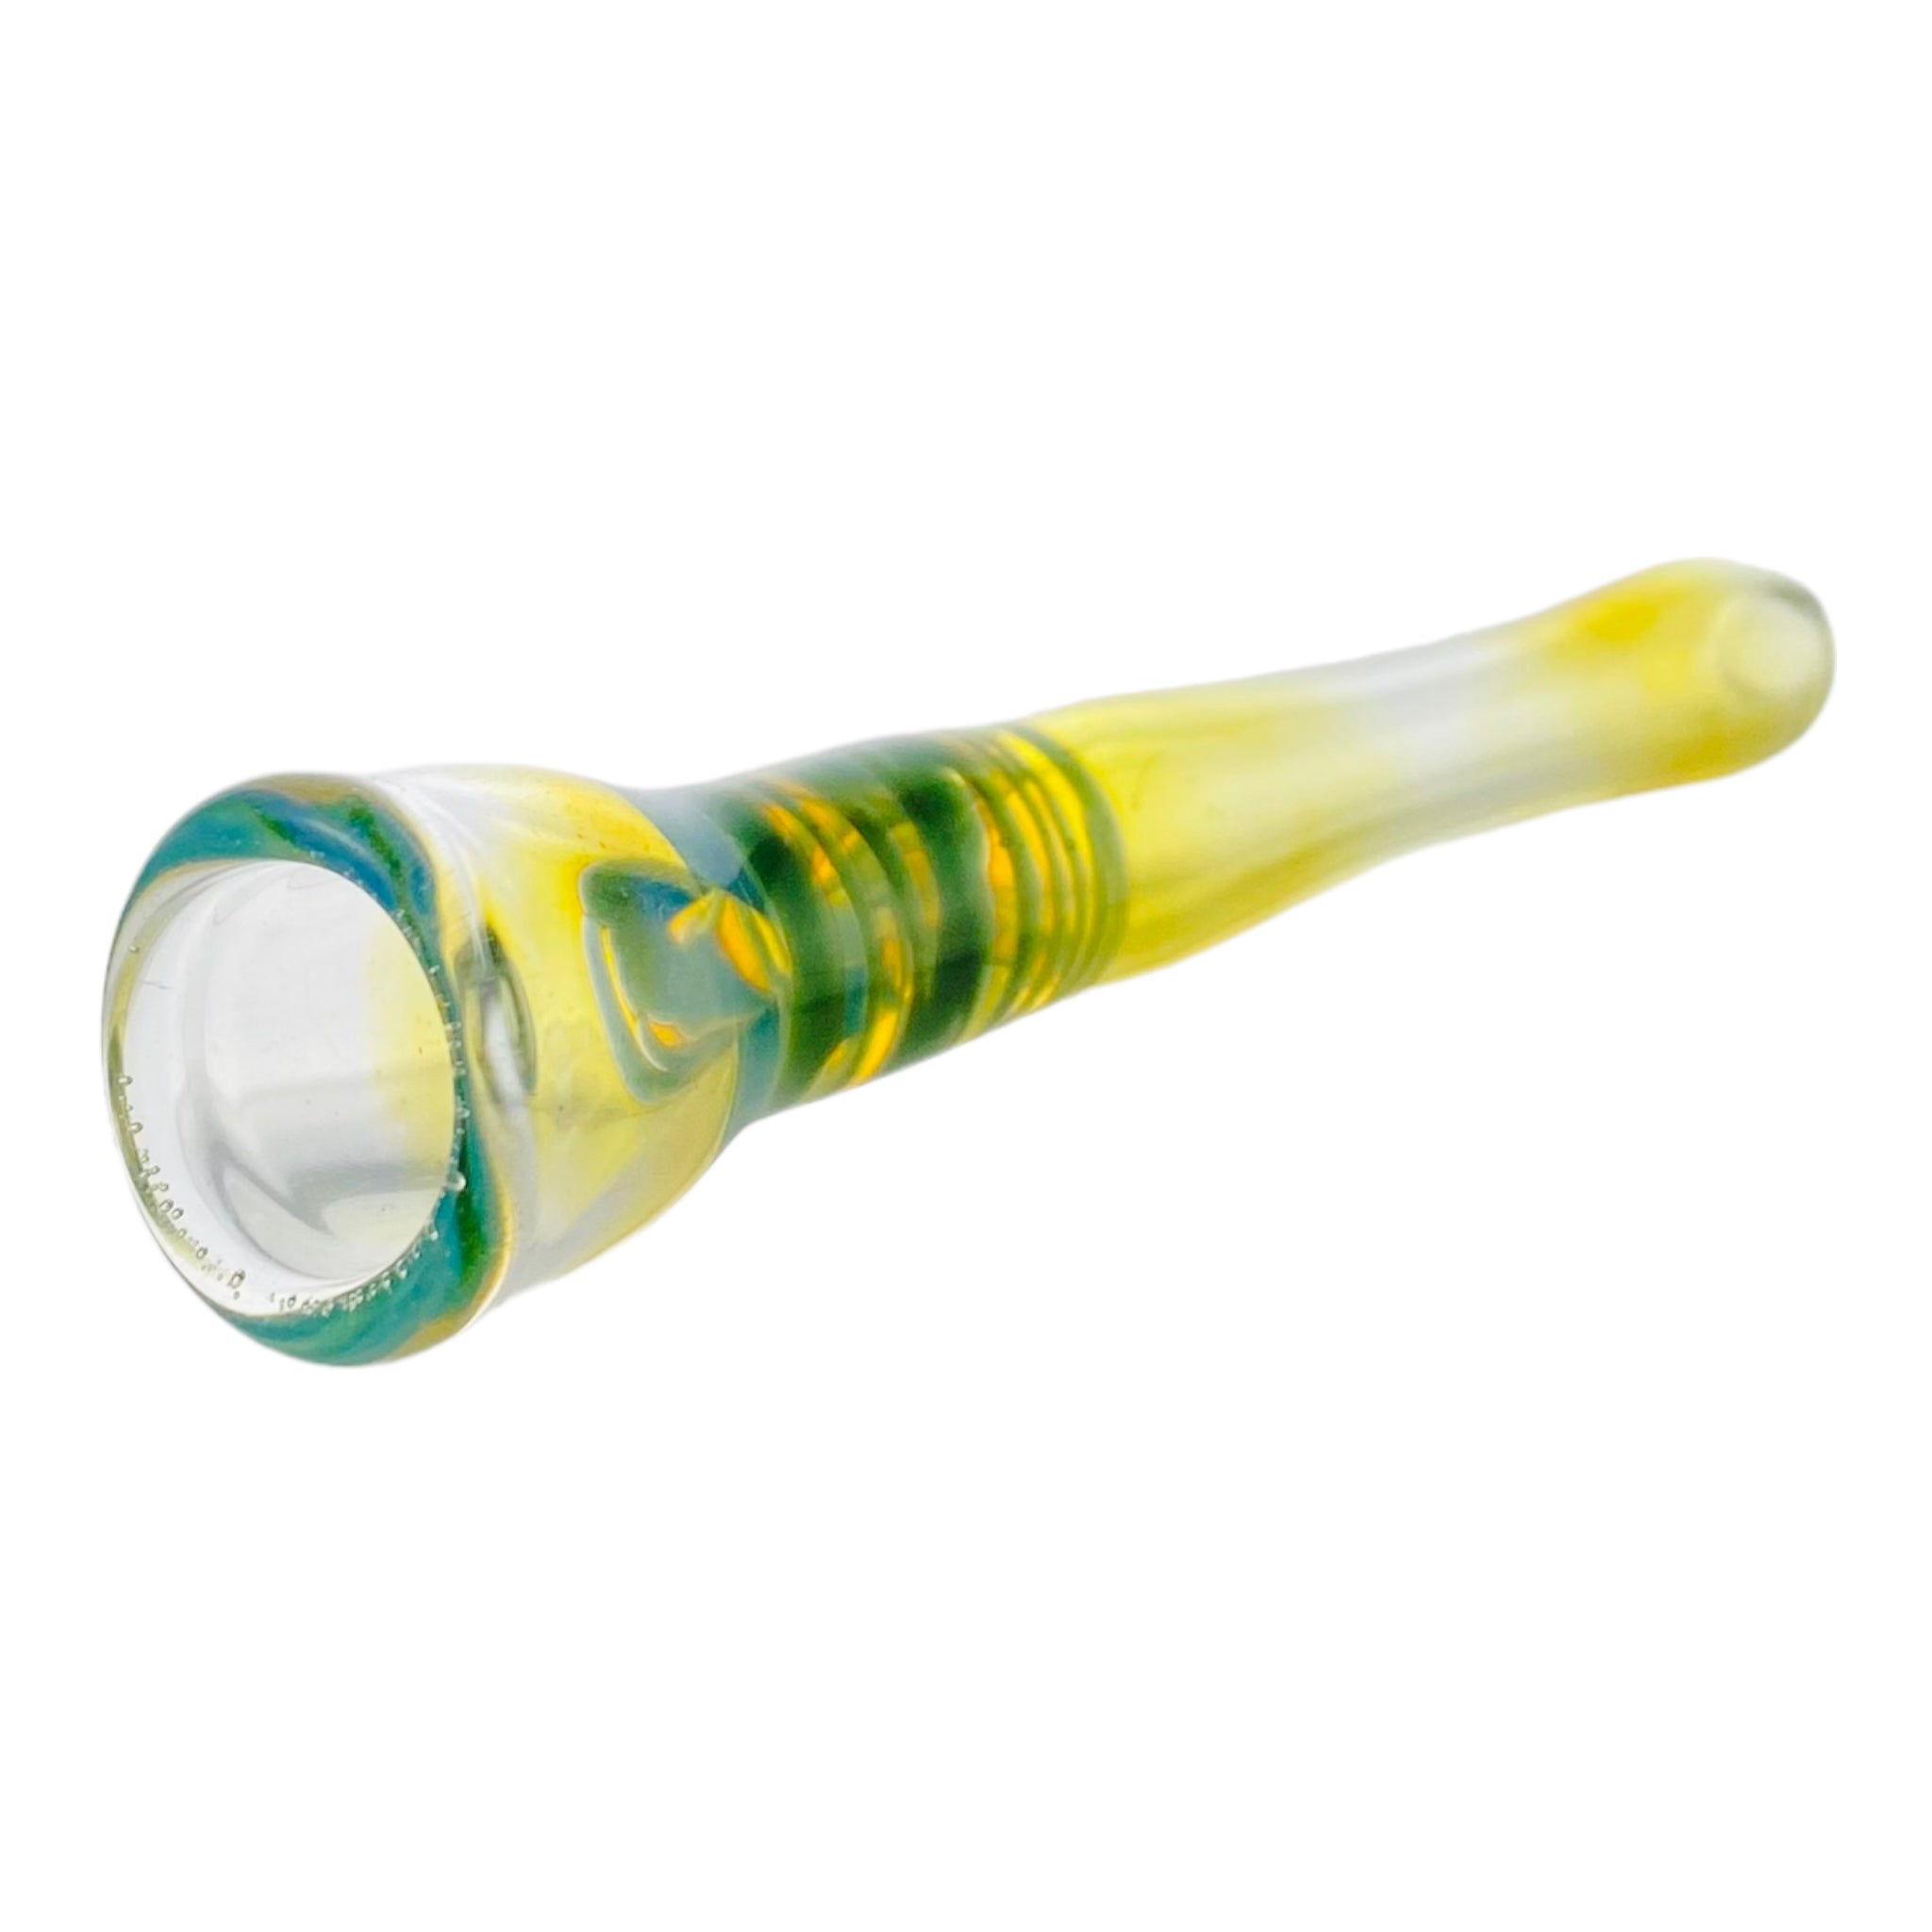 Glass Chillum Pipe - Yellow Silver Fuming With Green Wrap